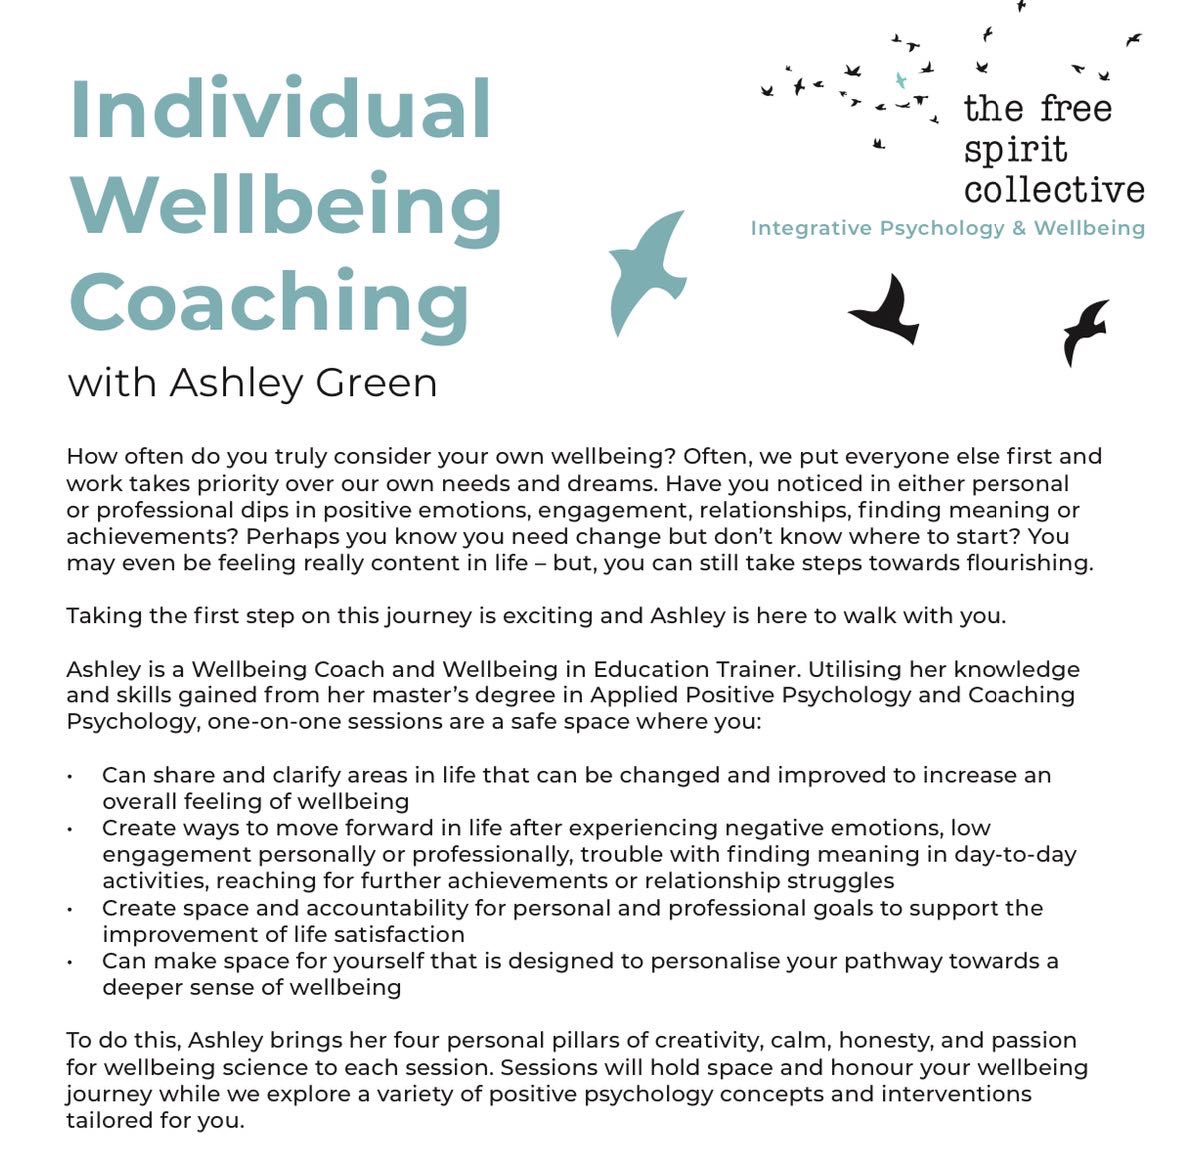 Ok, it’s almost time to begin my new job! Part of my role at The Free Spirit Collective is as a Wellbeing Coach. Swipe for details. I’d love to hear from you if you’re interested in sessions 🙏🏻 #wellbeing #WellbeingEdChat #wellbeingcoach #positivepsychologyineducation